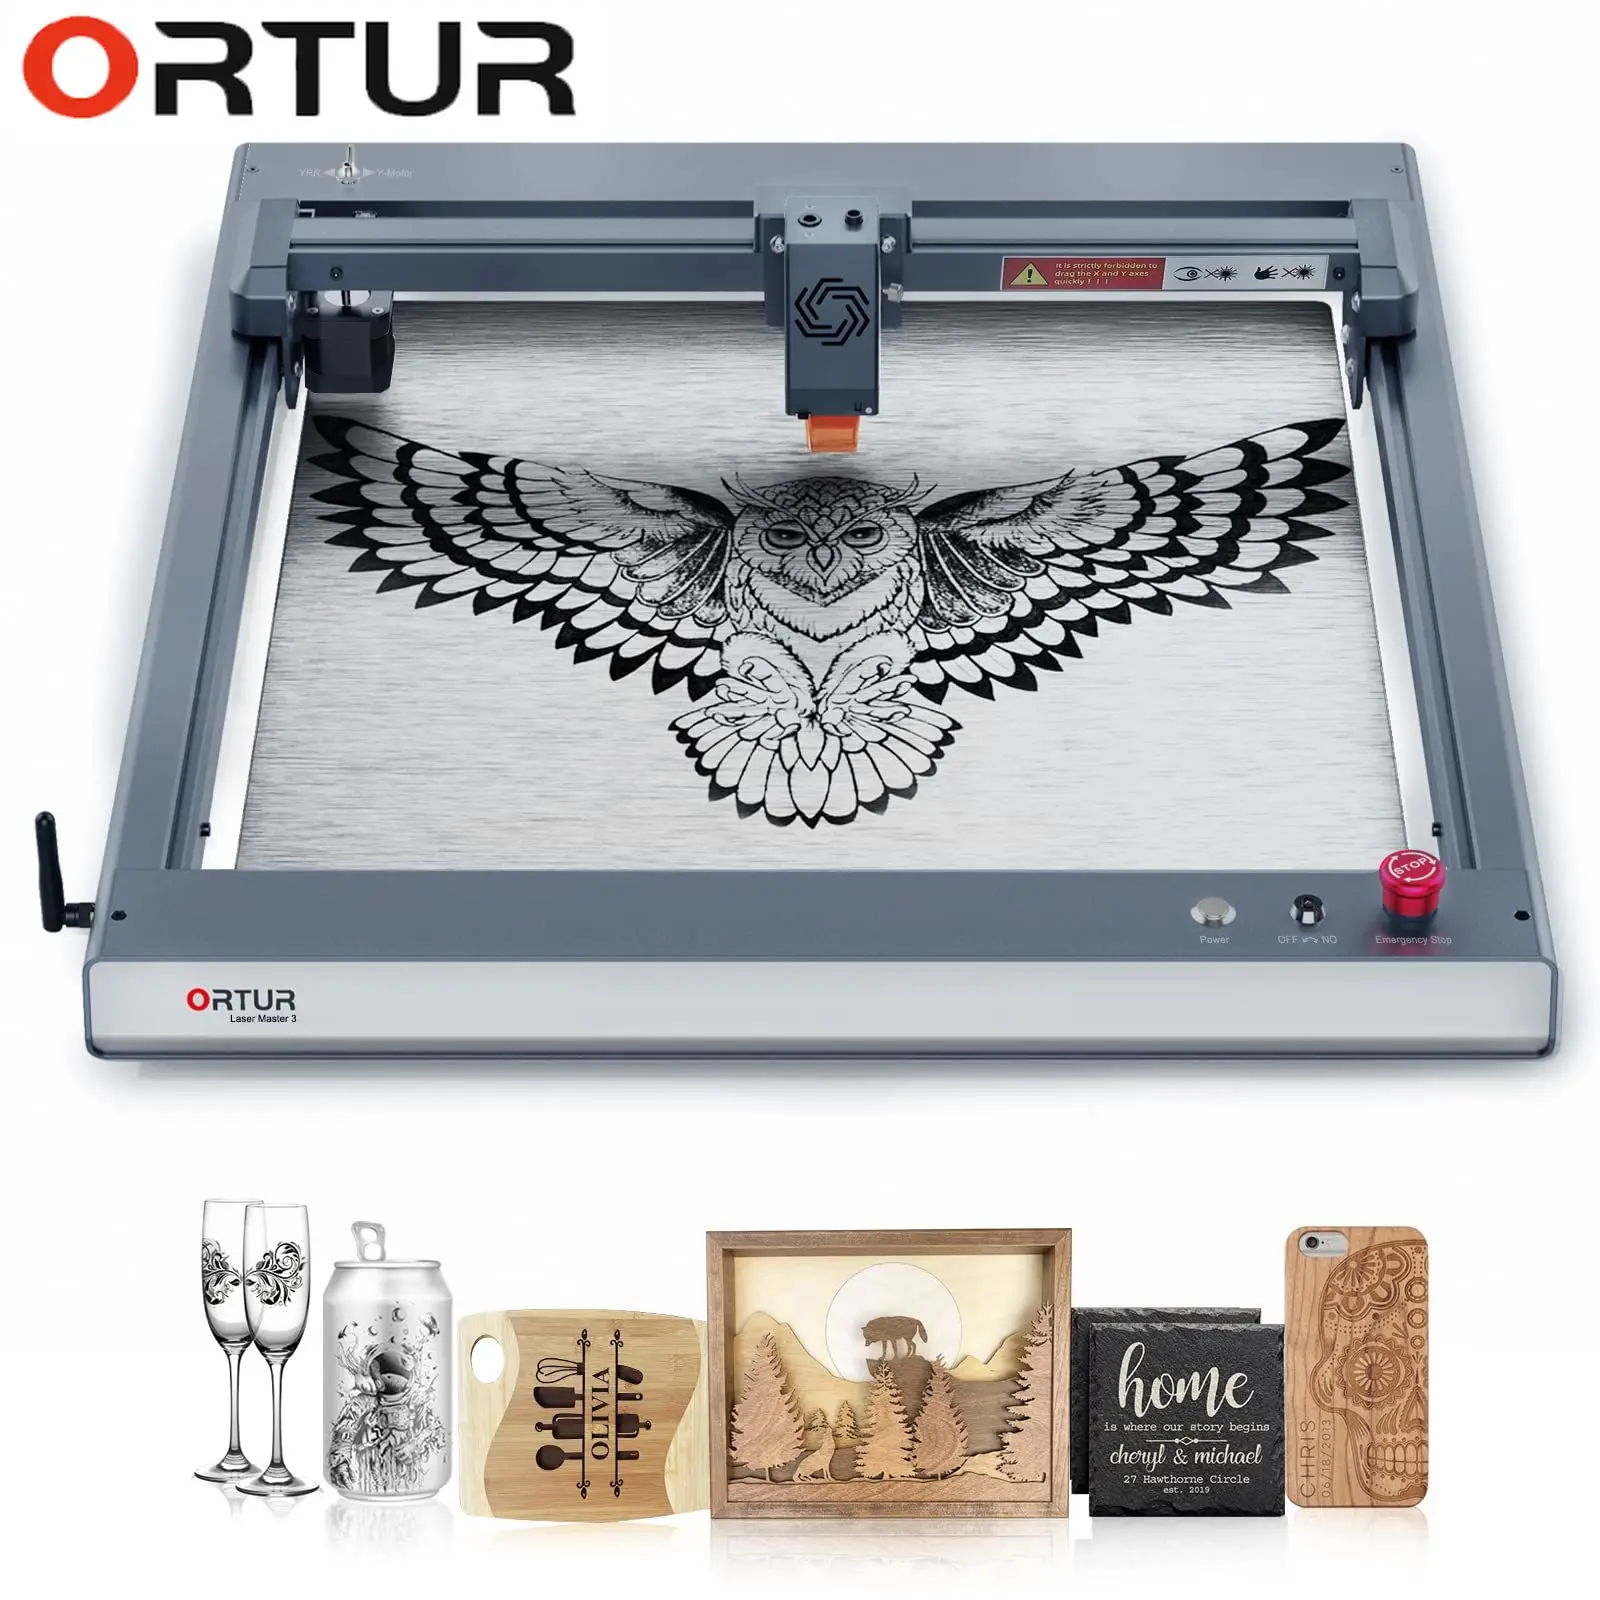 ORTUR Laser Master 3 Laser Engraver, 10W Higher Accuracy Laser Cutter,  20000mm/min Engraving Speed and App Control Laser Engraver for Wood and  Metal